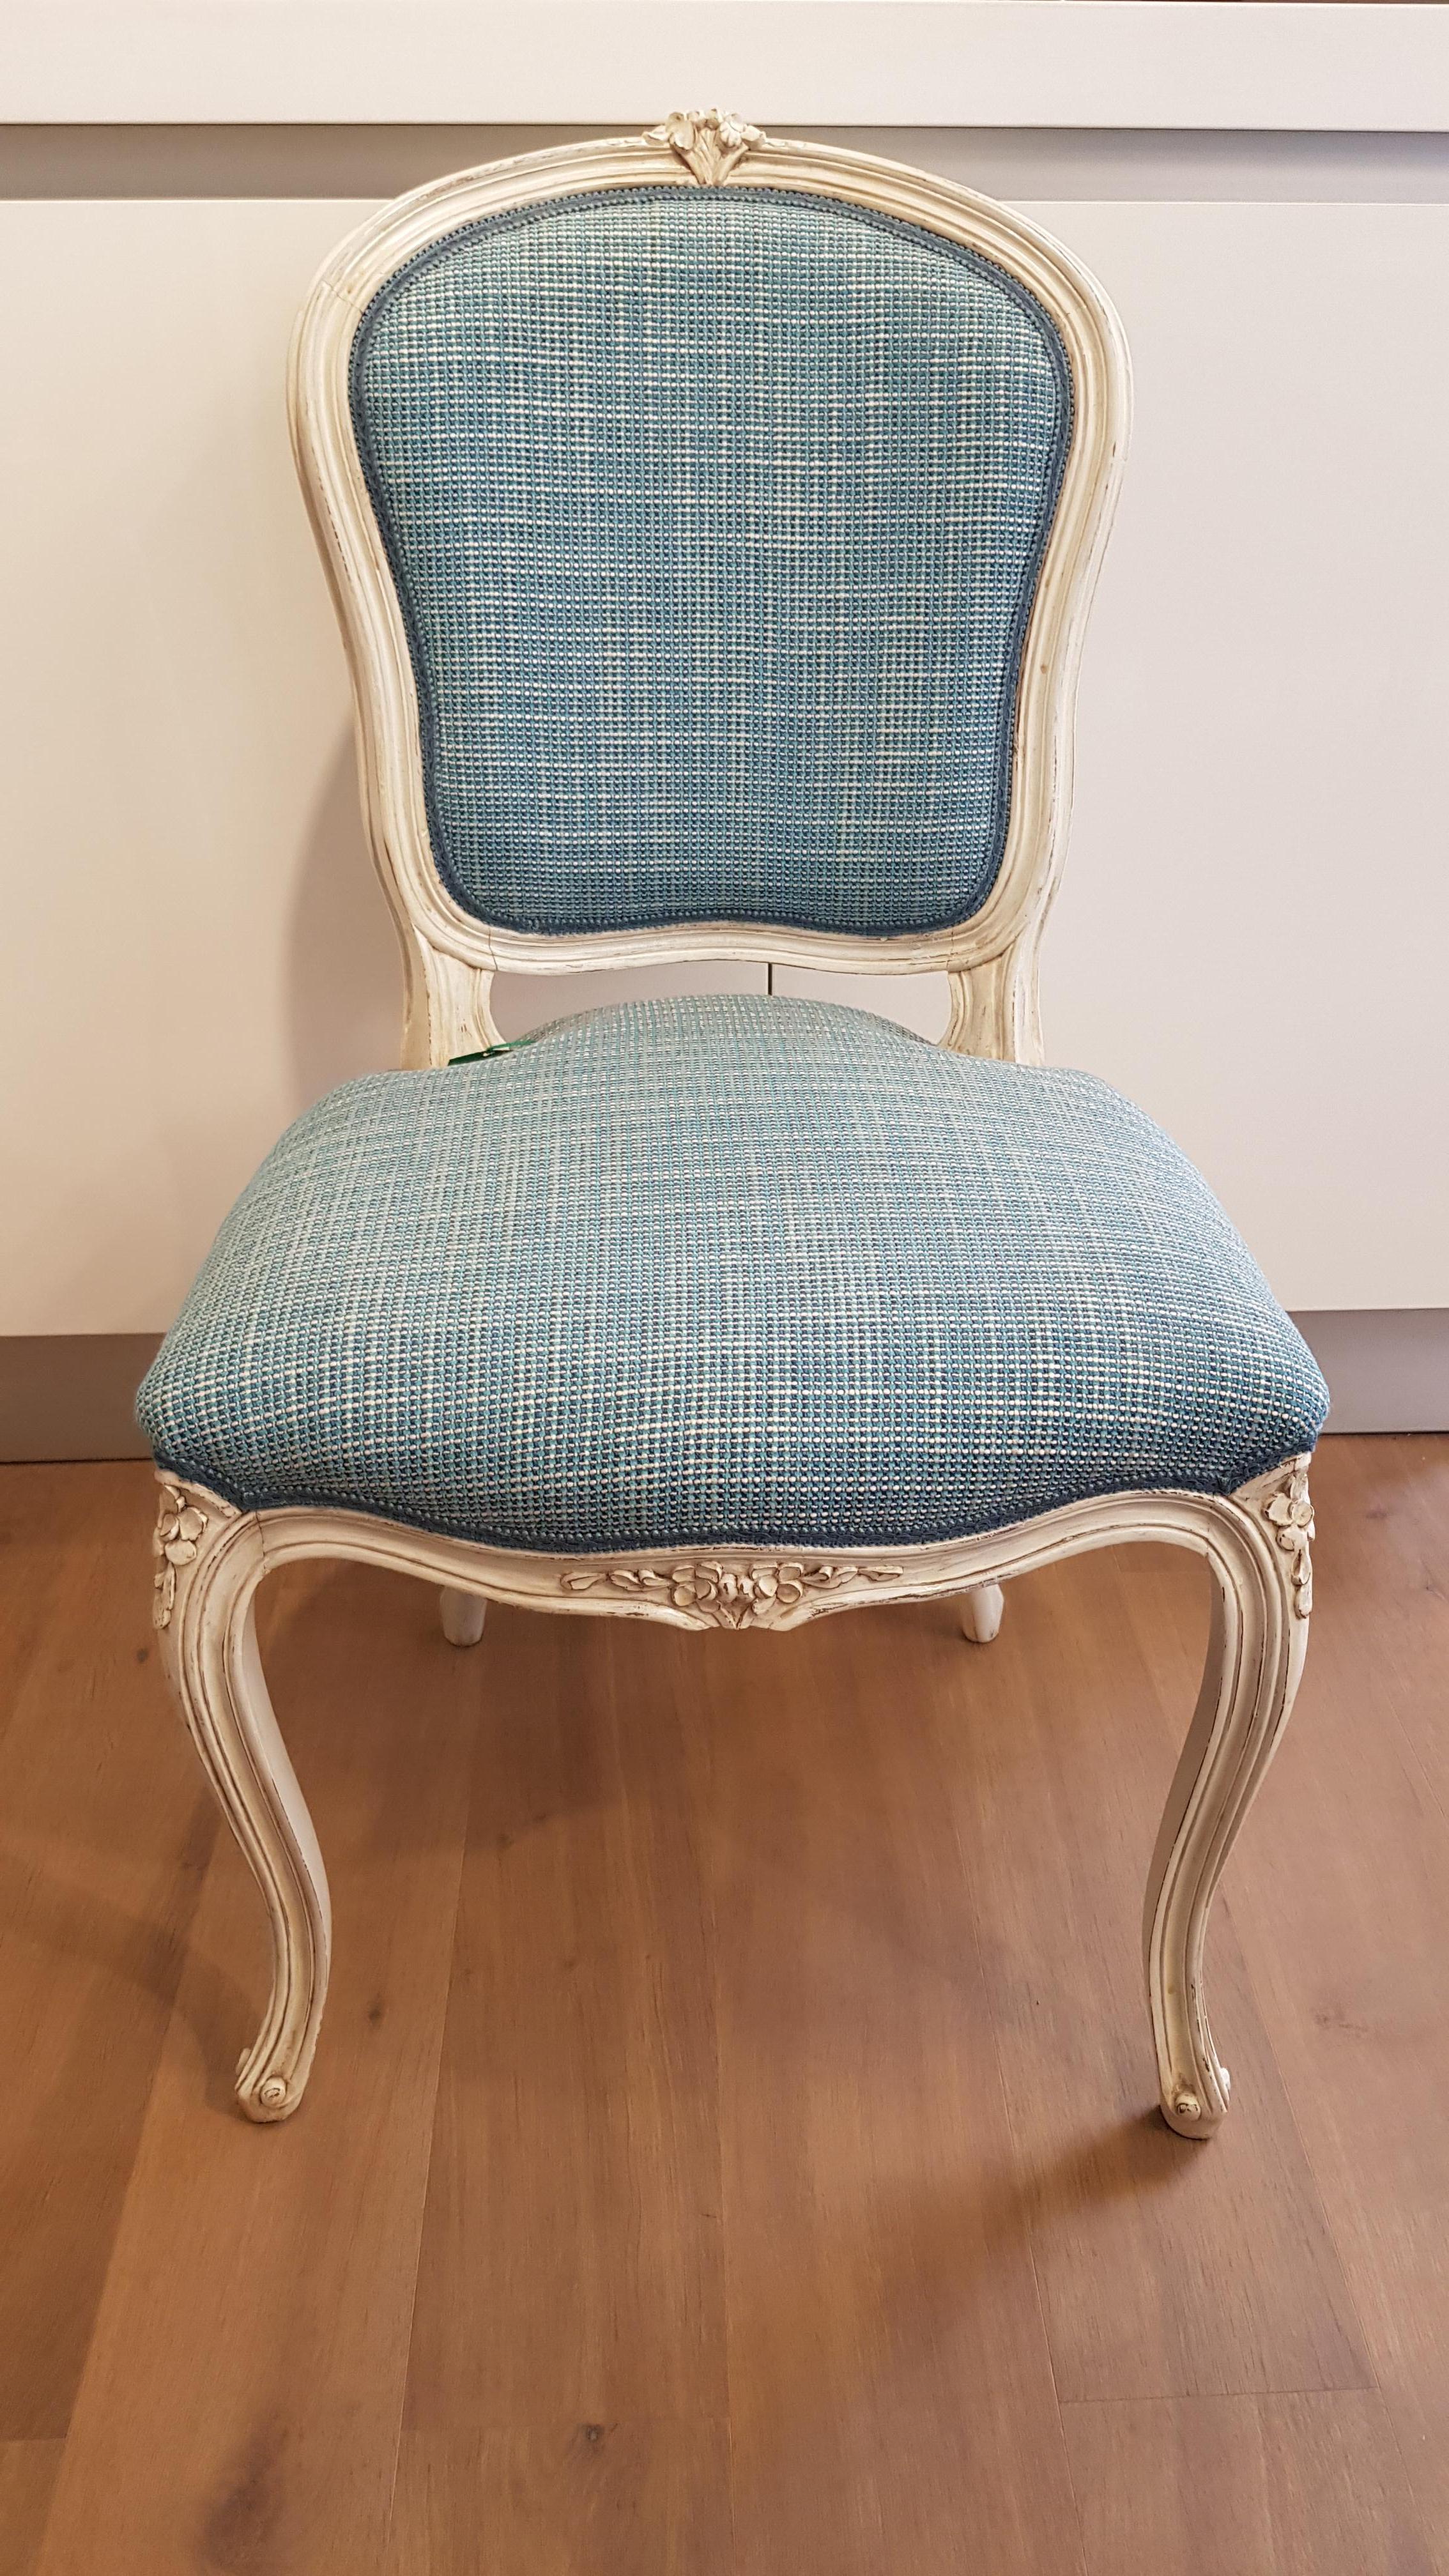 Louis XV style chairs handcrafted in Italy in the 1950s.
The chair is in solid walnut finely hand carved completely restored in its entirety. The padding has been rebuilt, the straps and springs replaced and then re-glued and coated with a